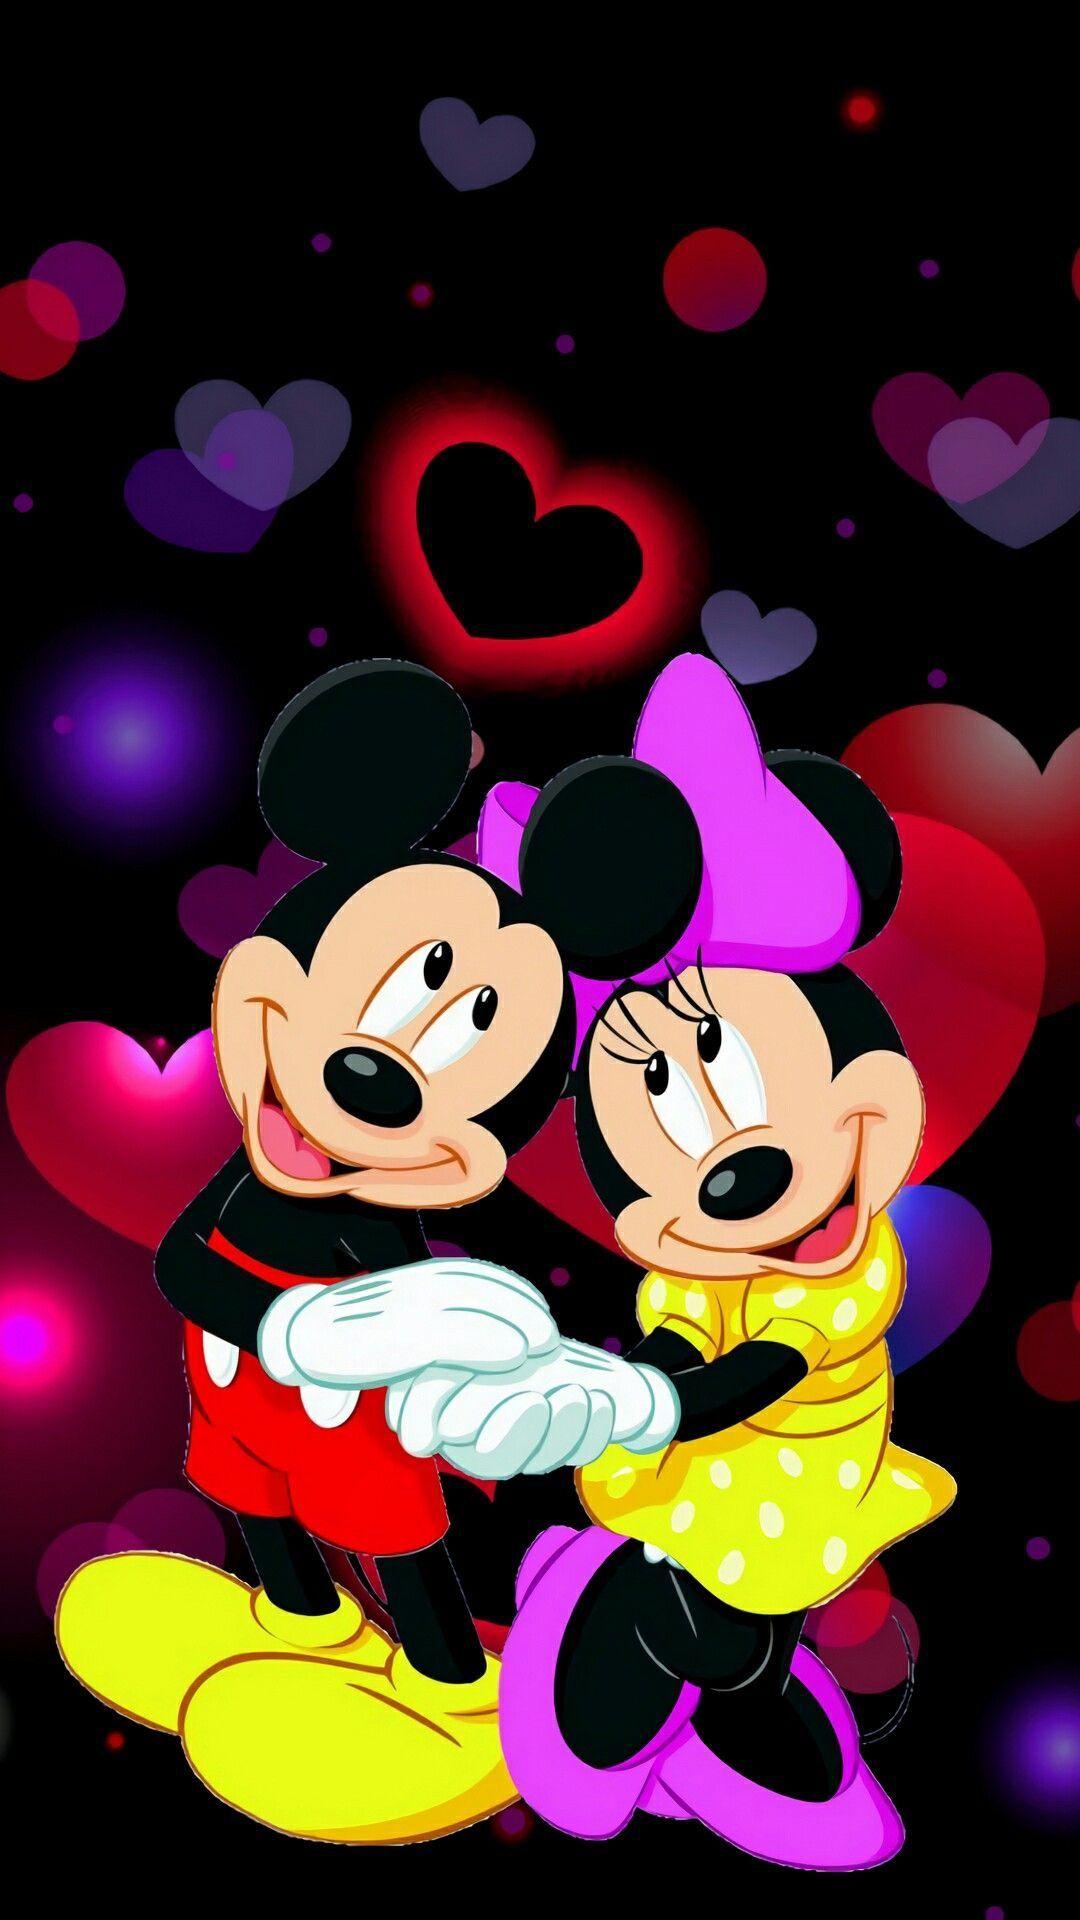 Mickey And Minnie iPhone Wallpaper, Free Stock Wallpaper